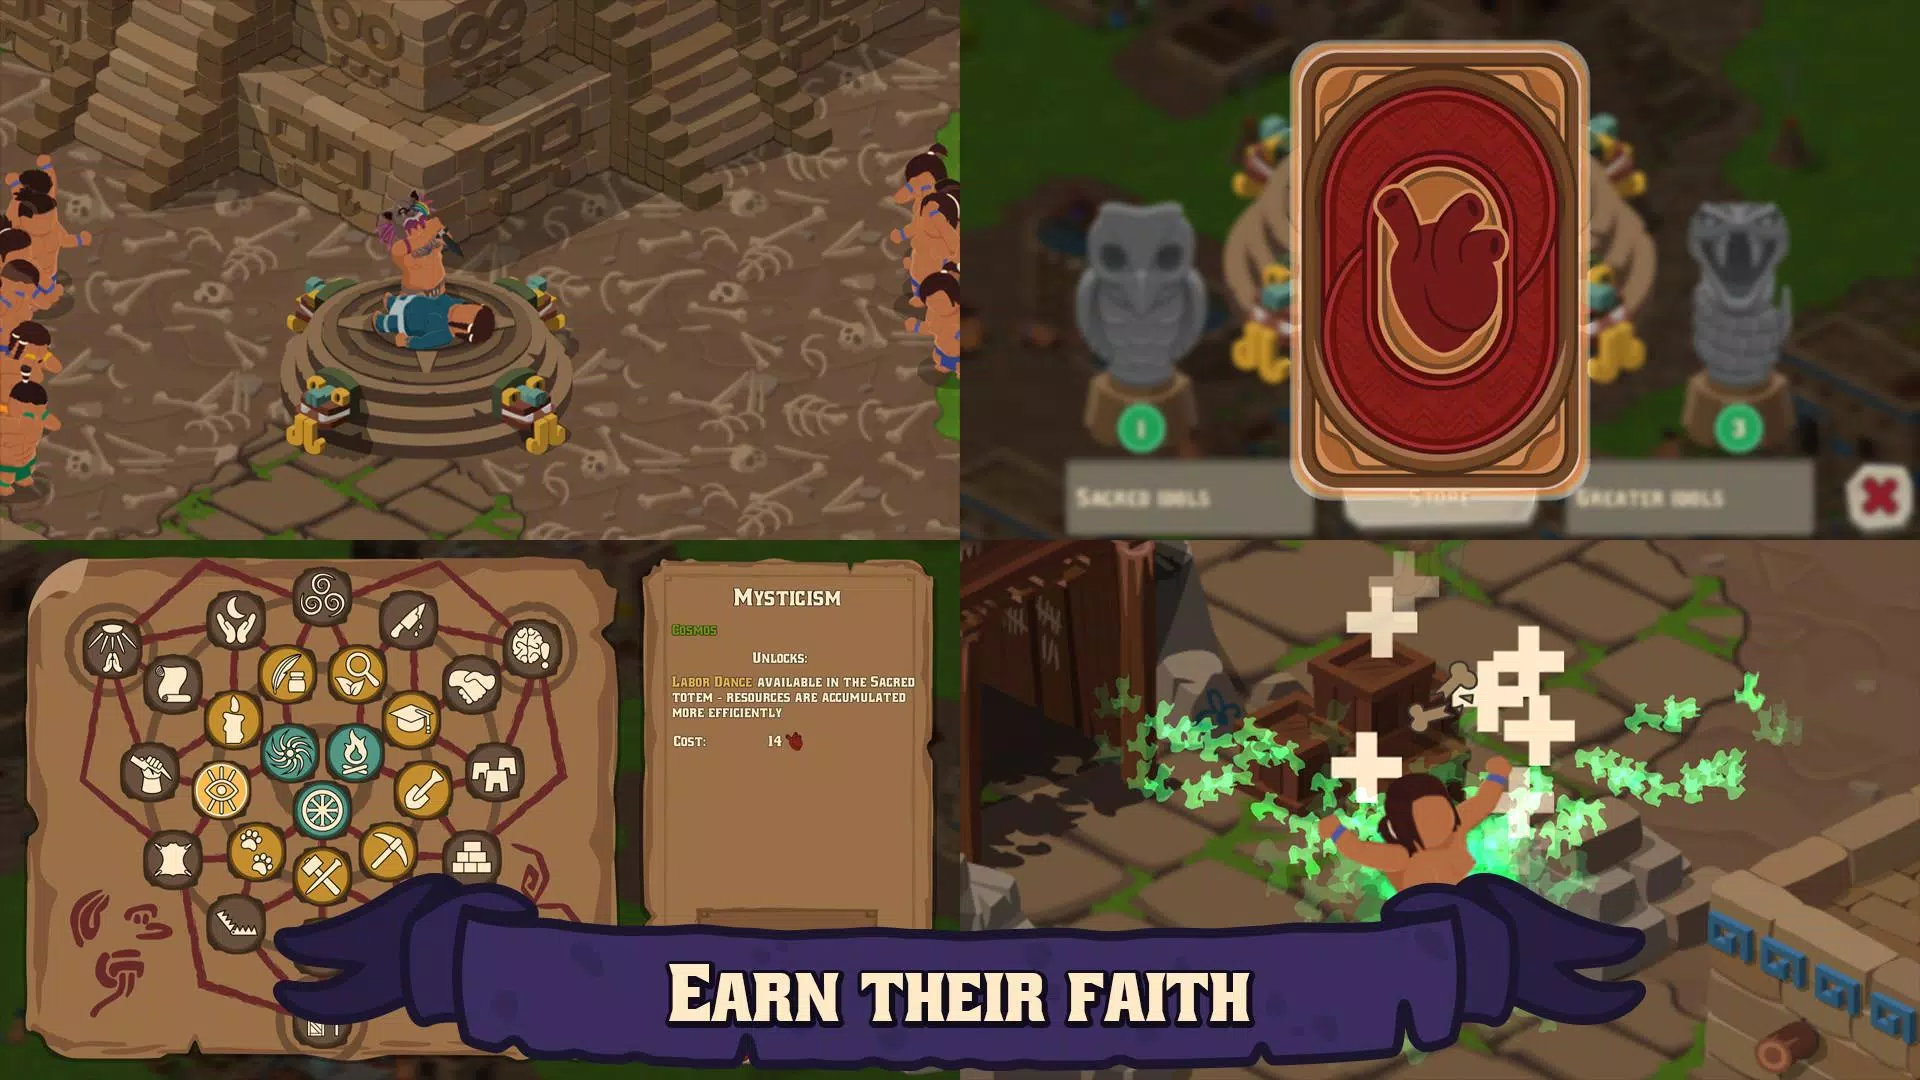 Sacrifices - APK Download for Android